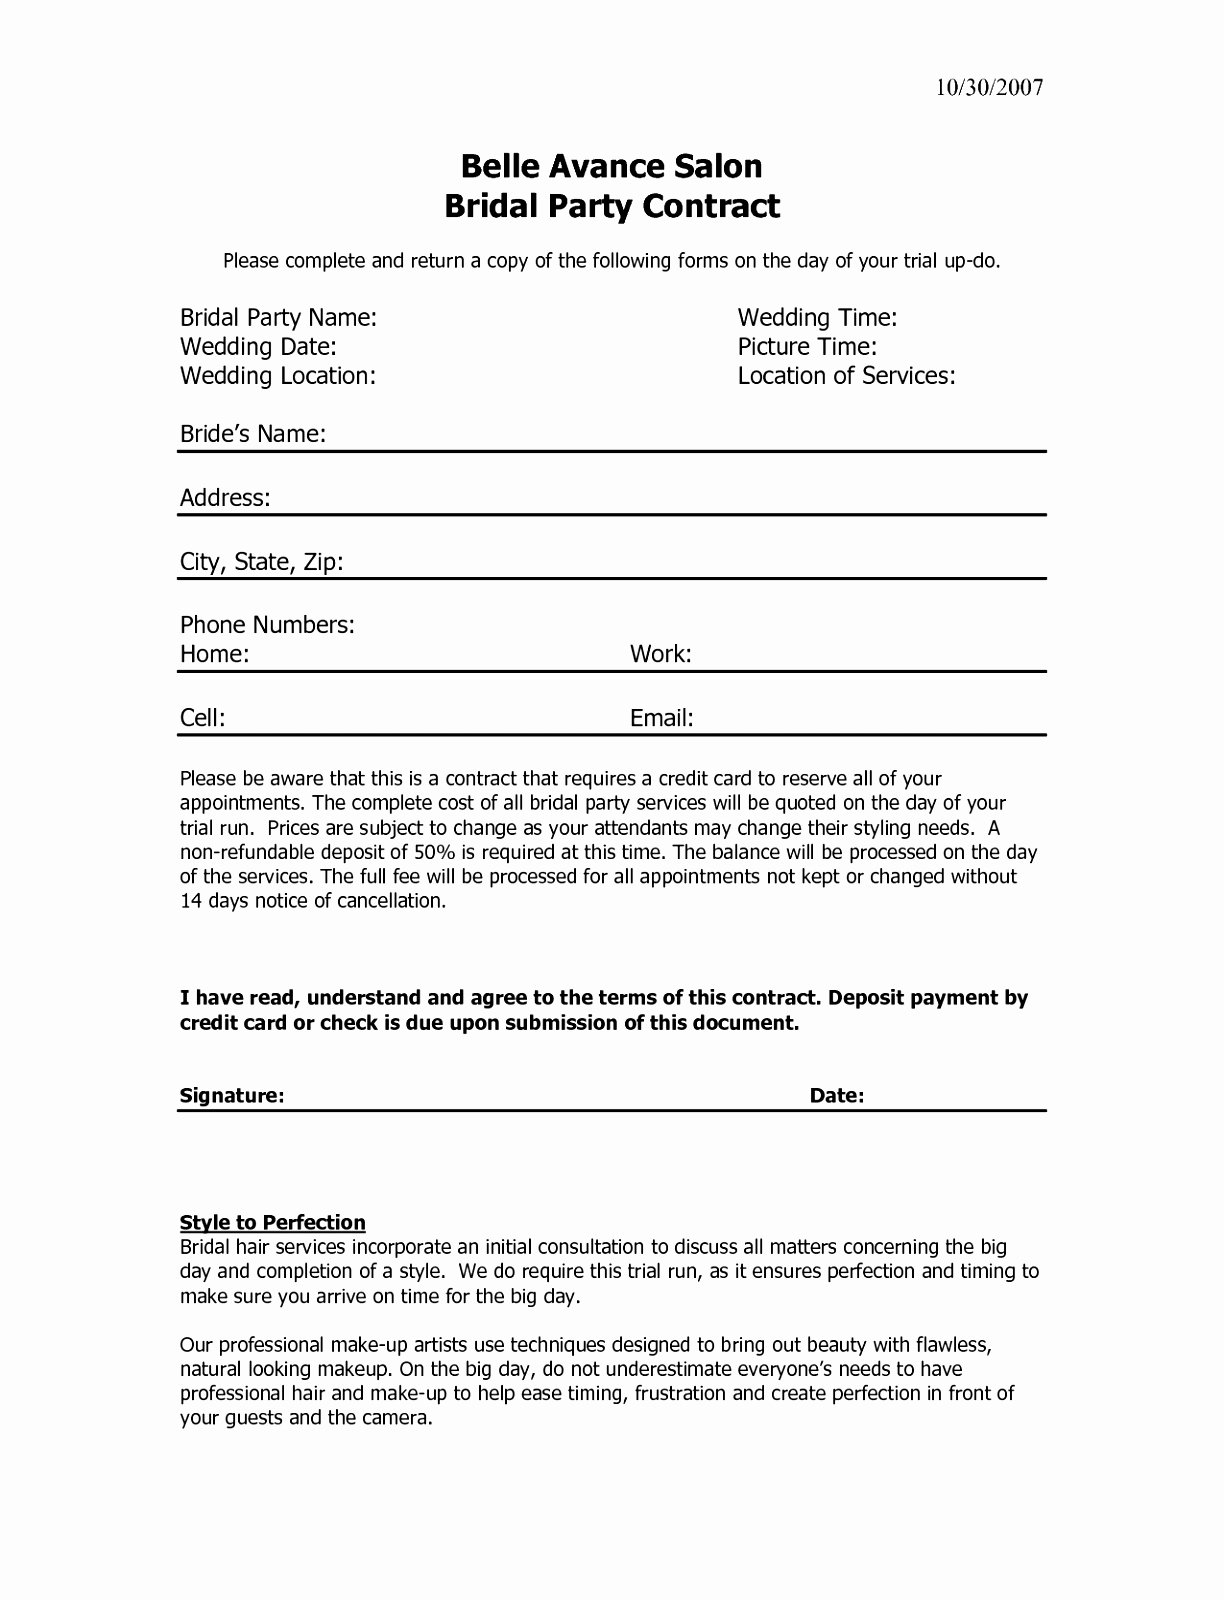 Hair Stylist Contract for Wedding Awesome 5 Wedding Hair Contract Template Tetip